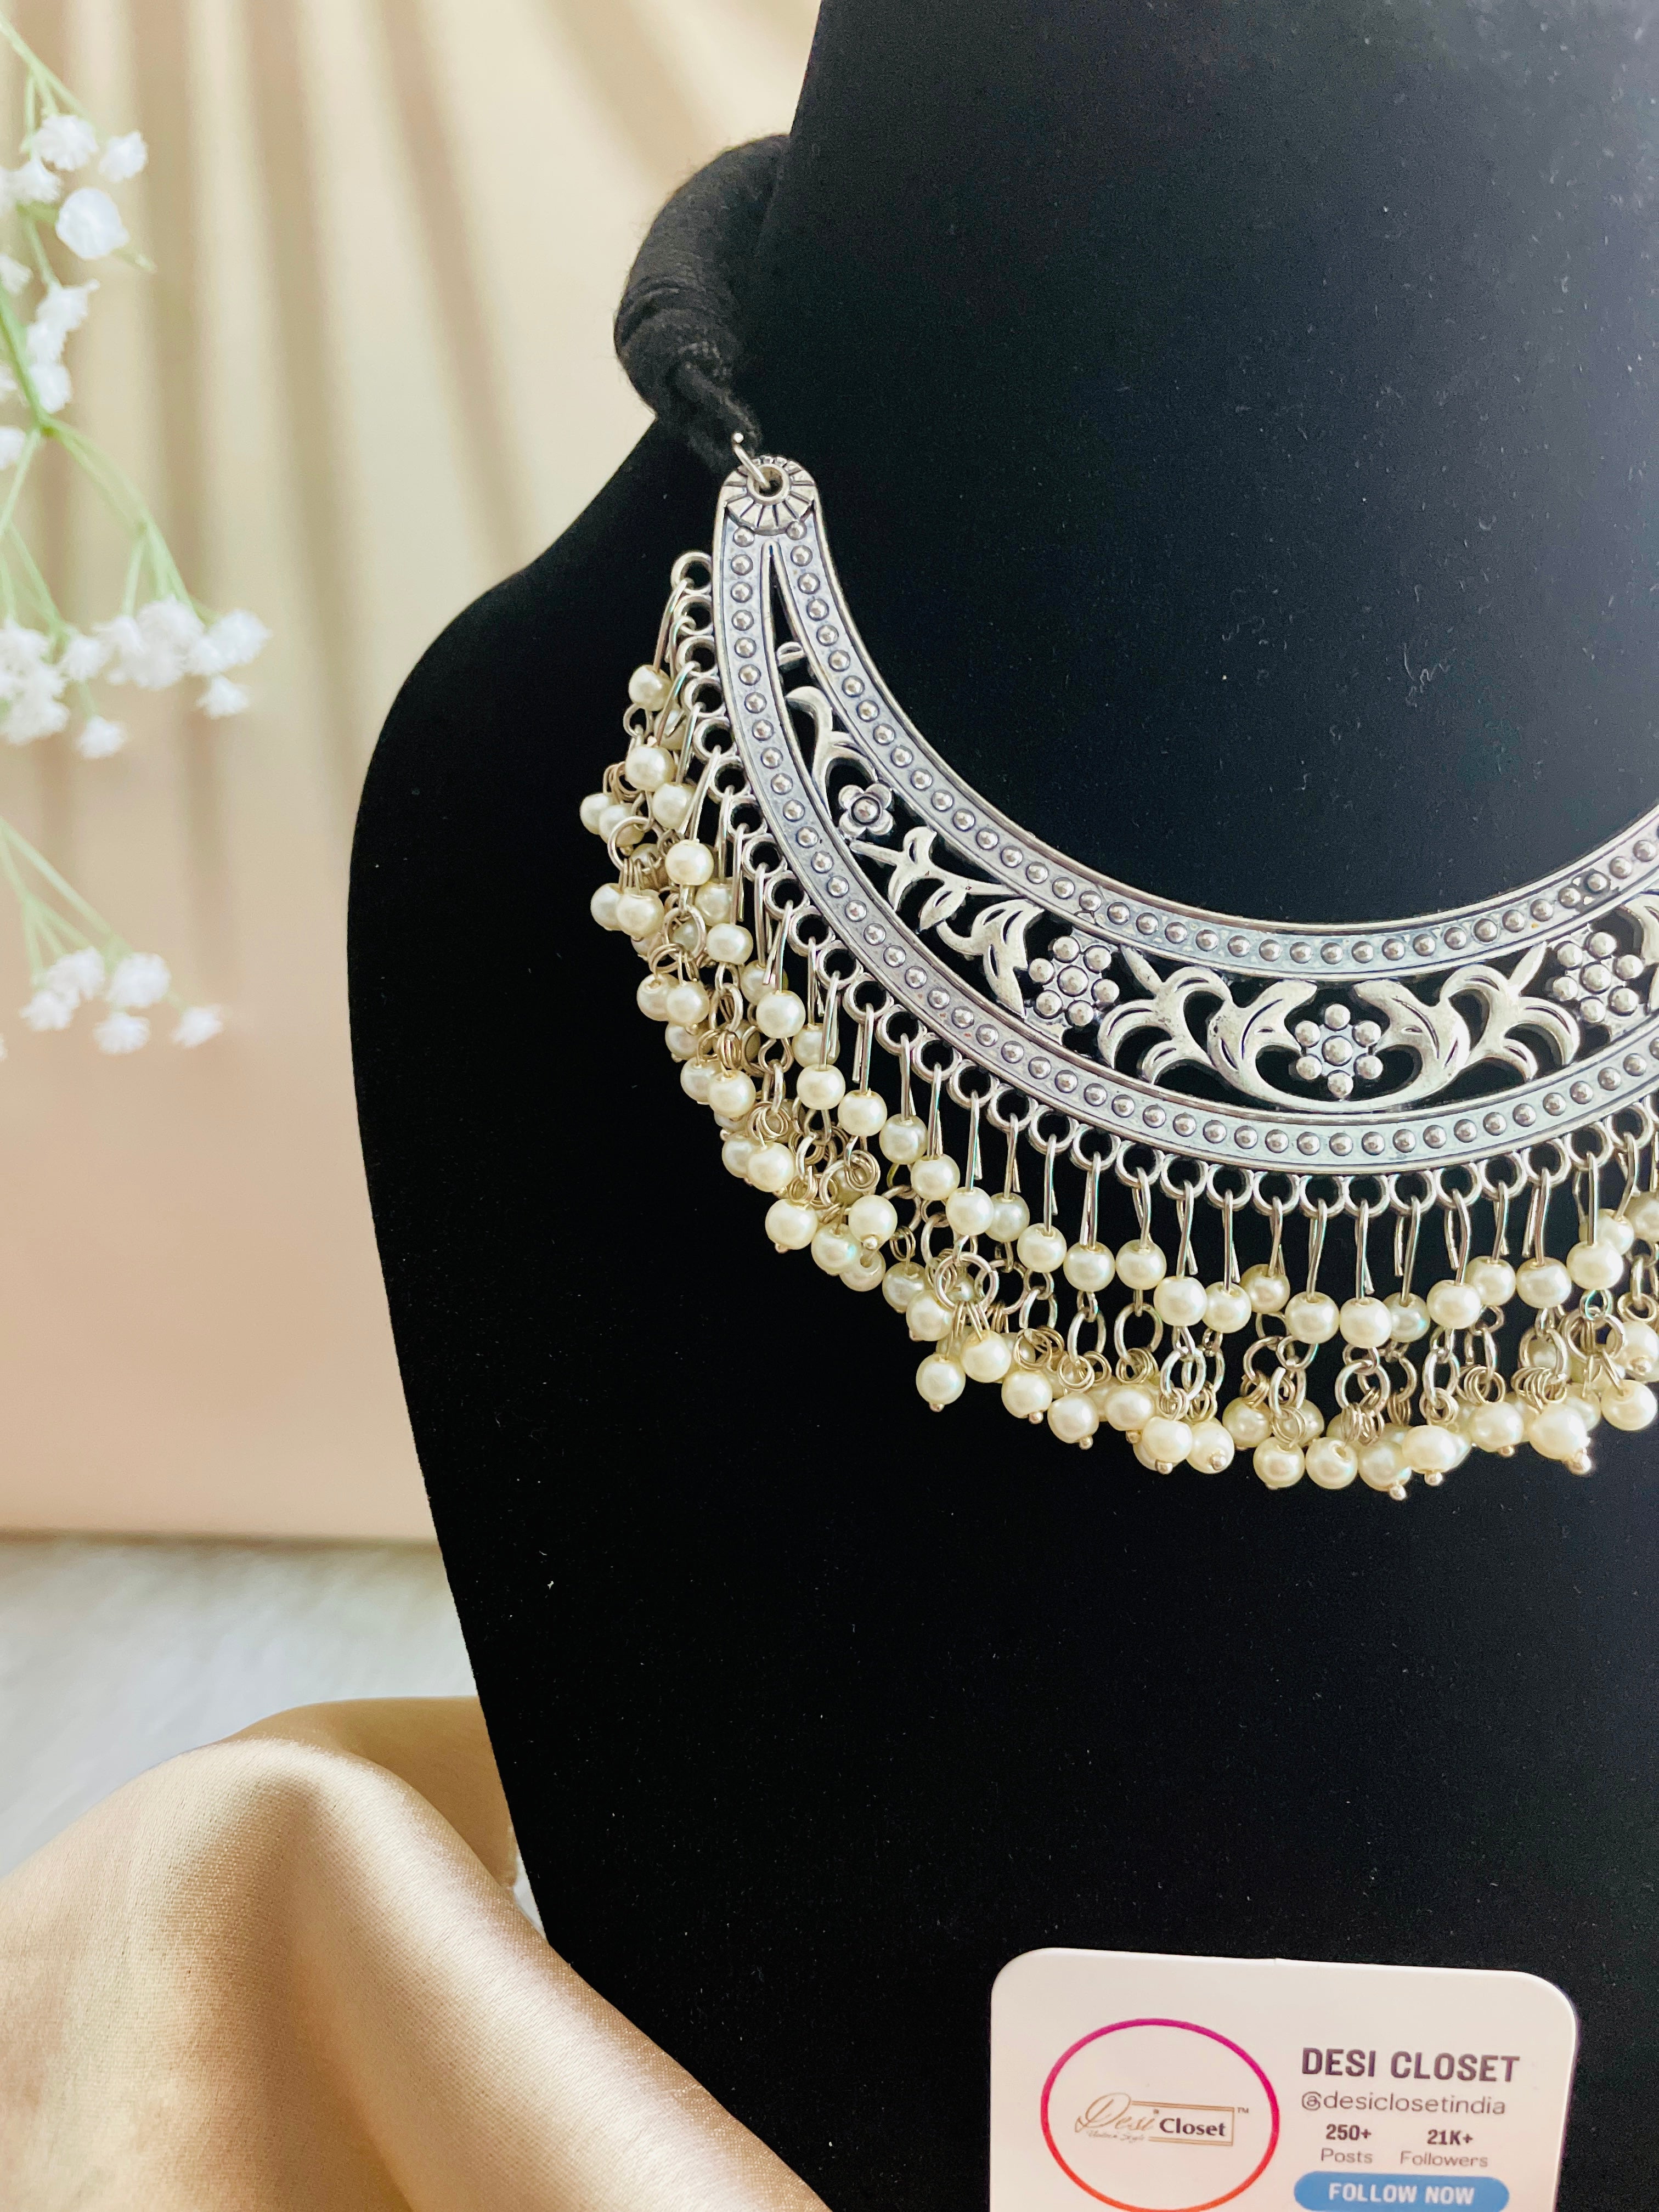 Hustli Silver White Necklace with Beautiful Carved Detail - Desi Closet